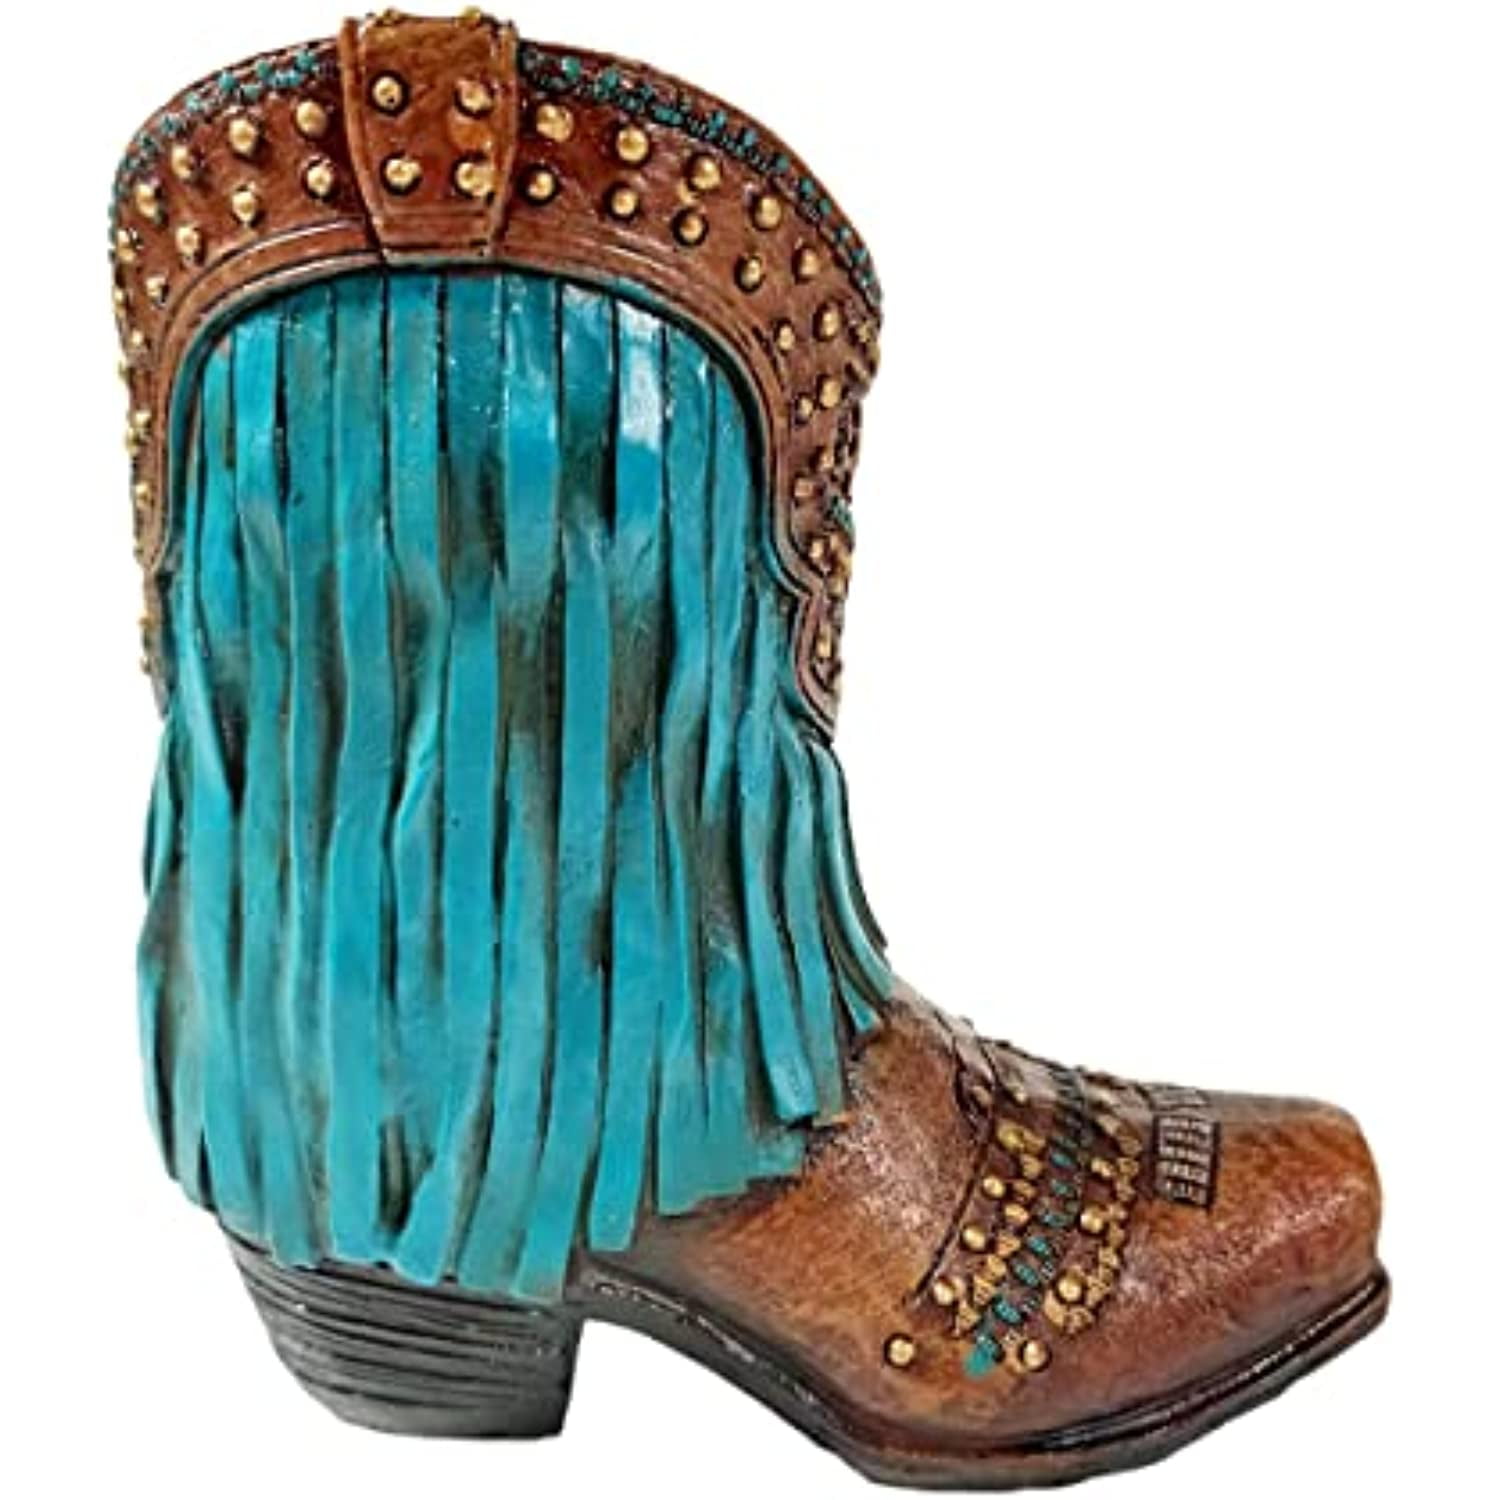 Mini Western Cowboy Cowgirl Turquoise Flower Boot Toothpick Pen Holder Vase Rustic Decoration 